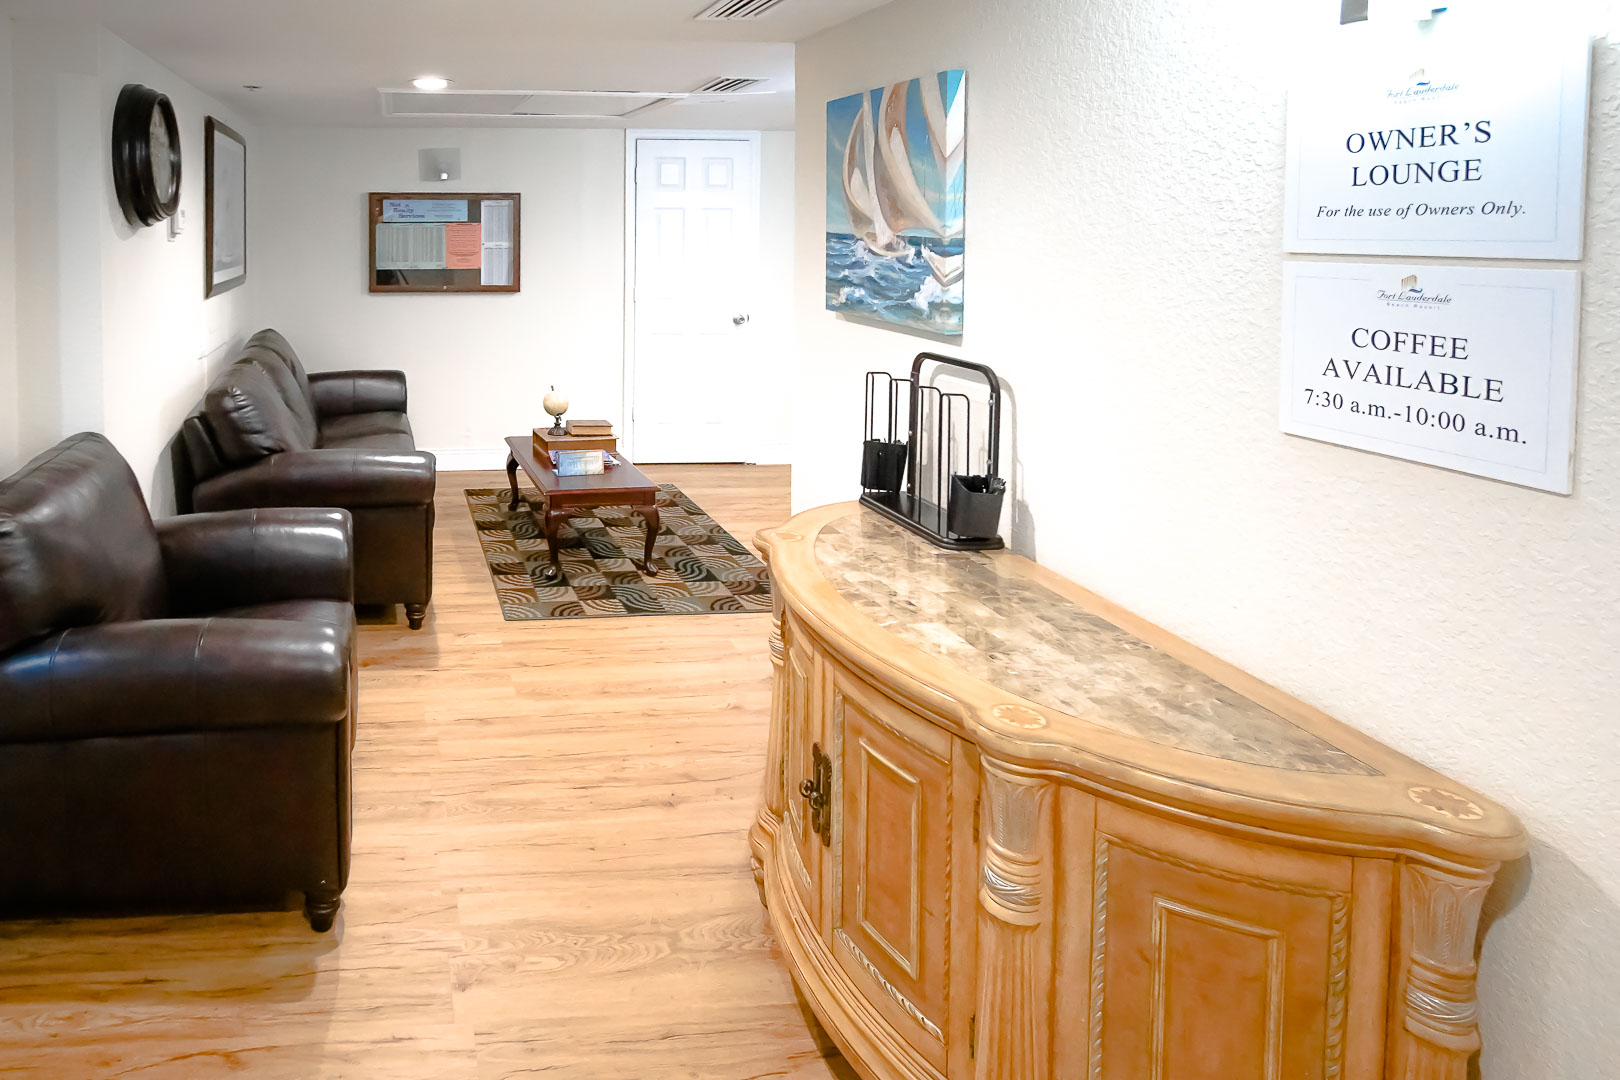 An Owners lounge at VRI's Ft. Lauderdale Beach Resort in Florida.